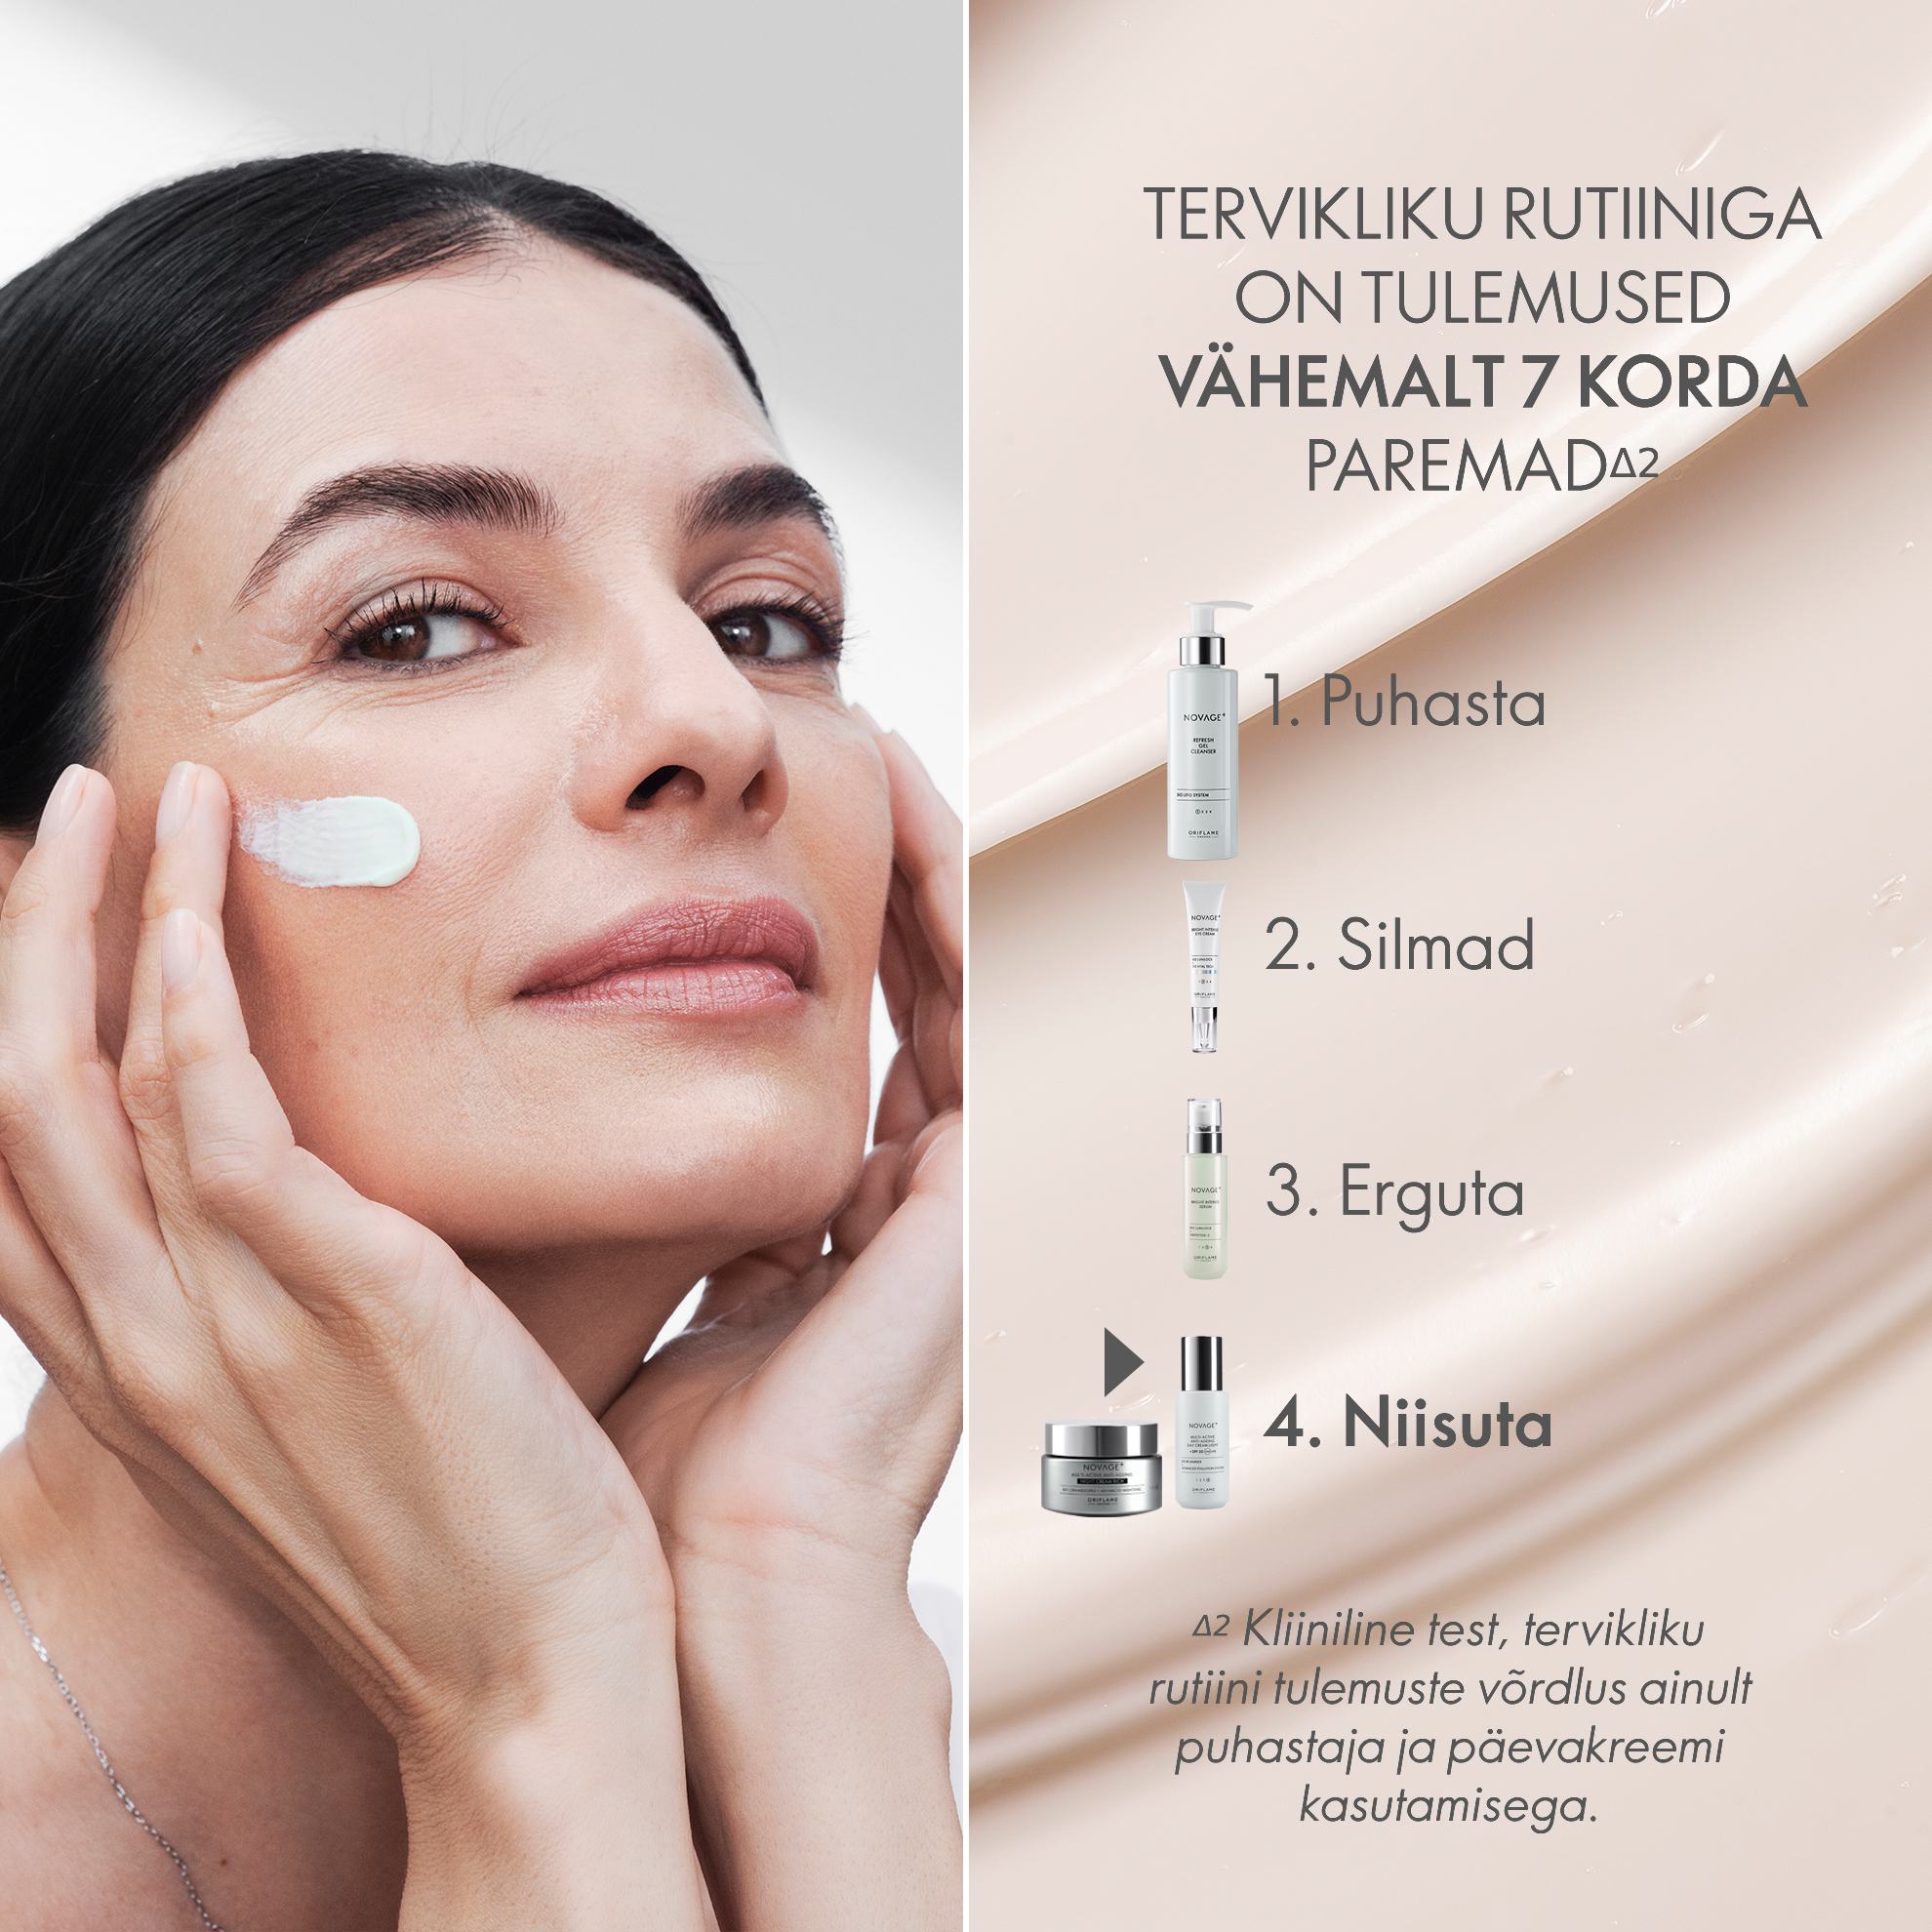 https://media-cdn.oriflame.com/productImage?externalMediaId=product-management-media%2fProducts%2f41058%2fEE%2f41058_4.png&id=17586746&version=1